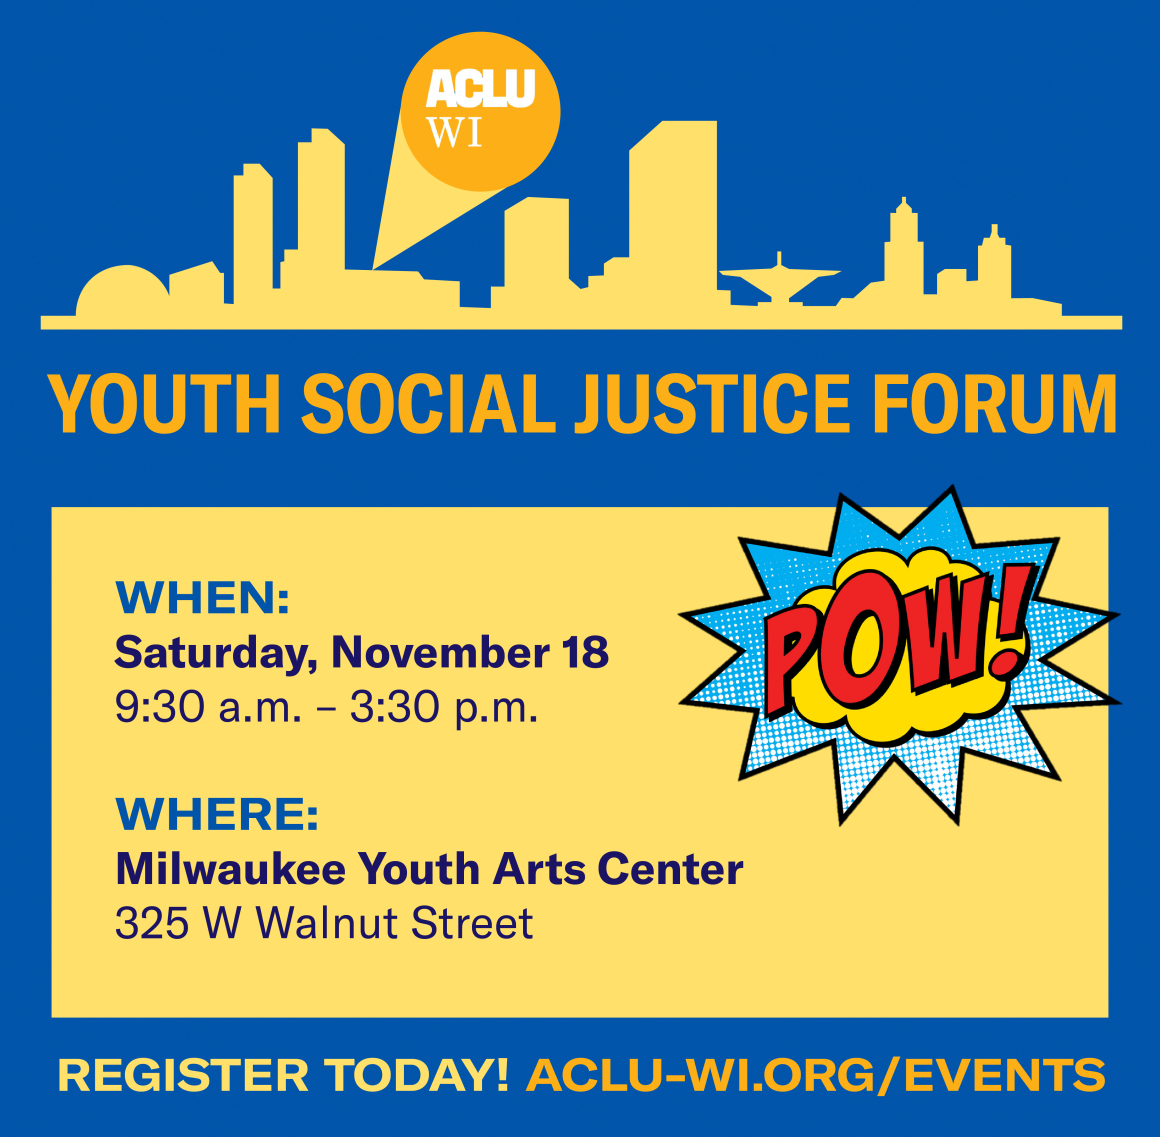 Youth Social Justice Forum 2023 at Milwaukee Youth Arts Center